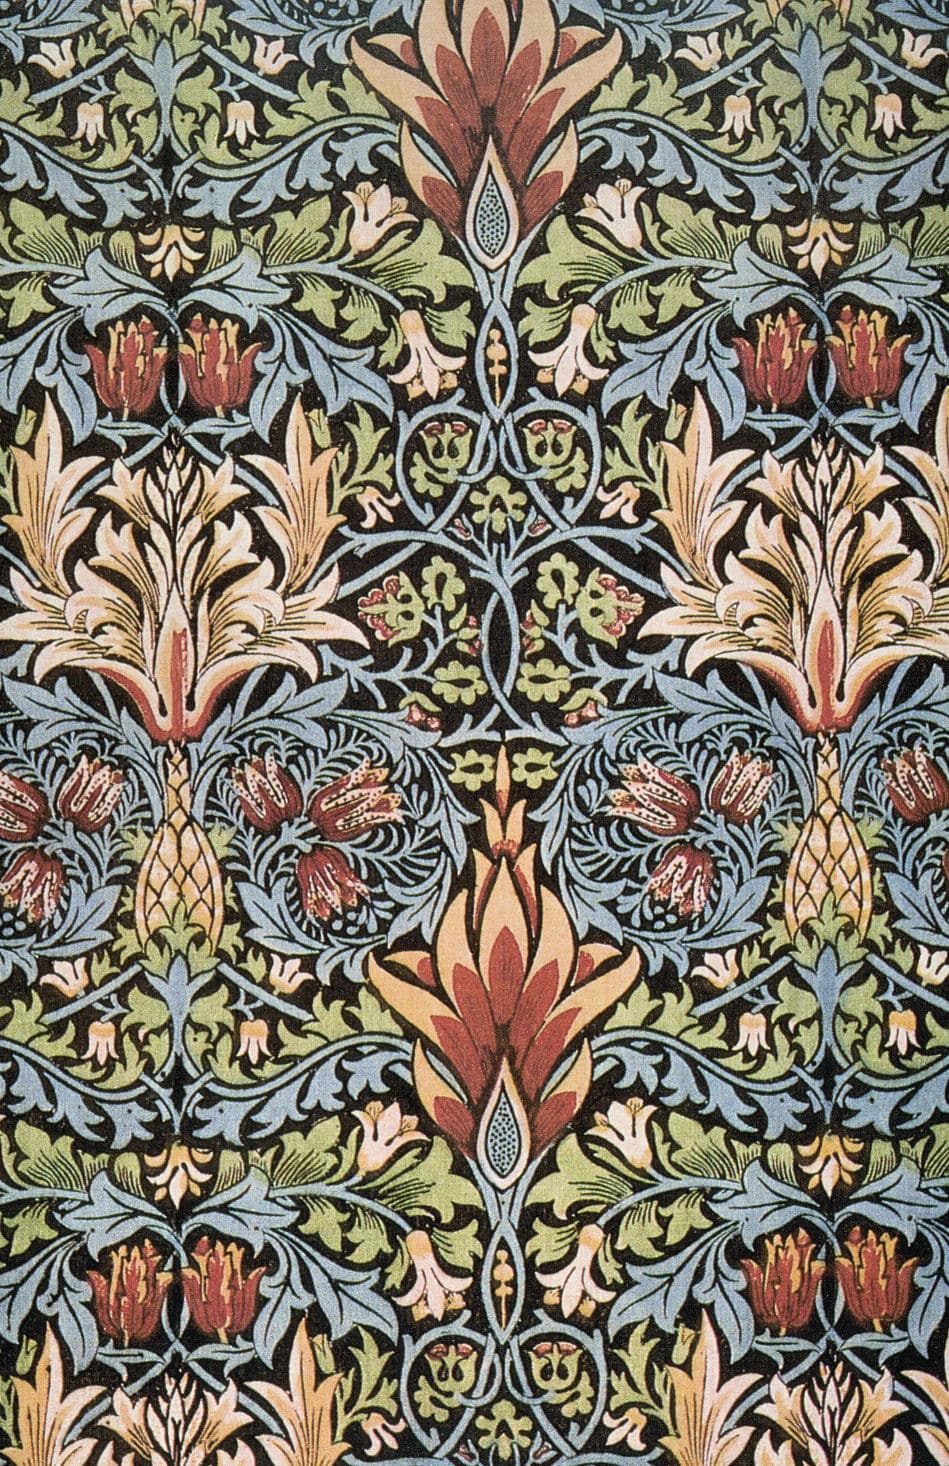 What Is the Arts and Crafts Movement?